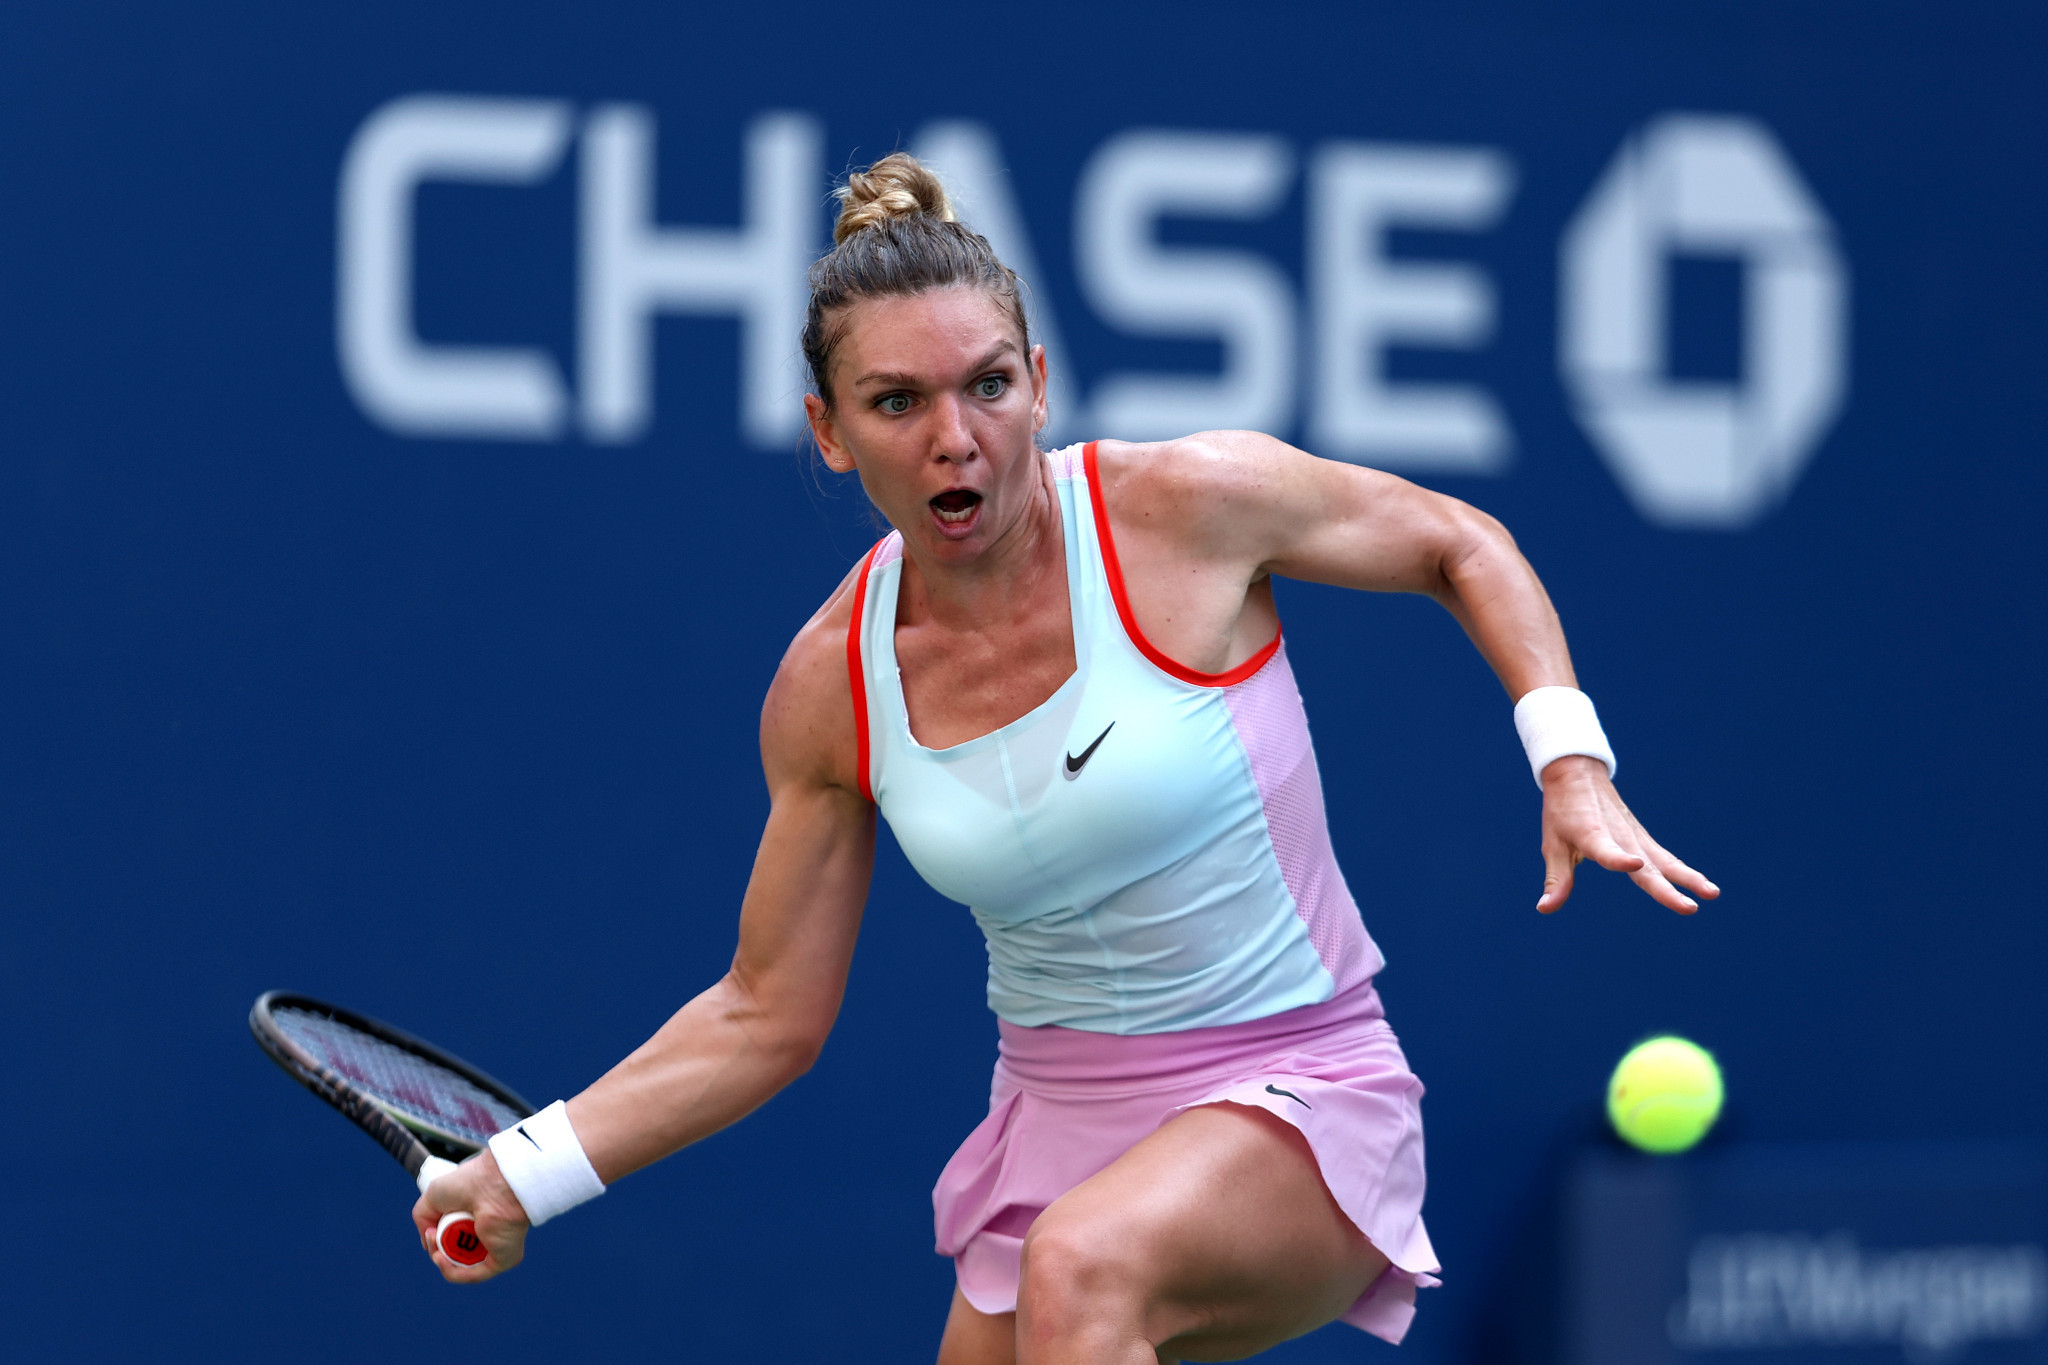 Halep stunned as Williams and Murray win on day one of US Open 